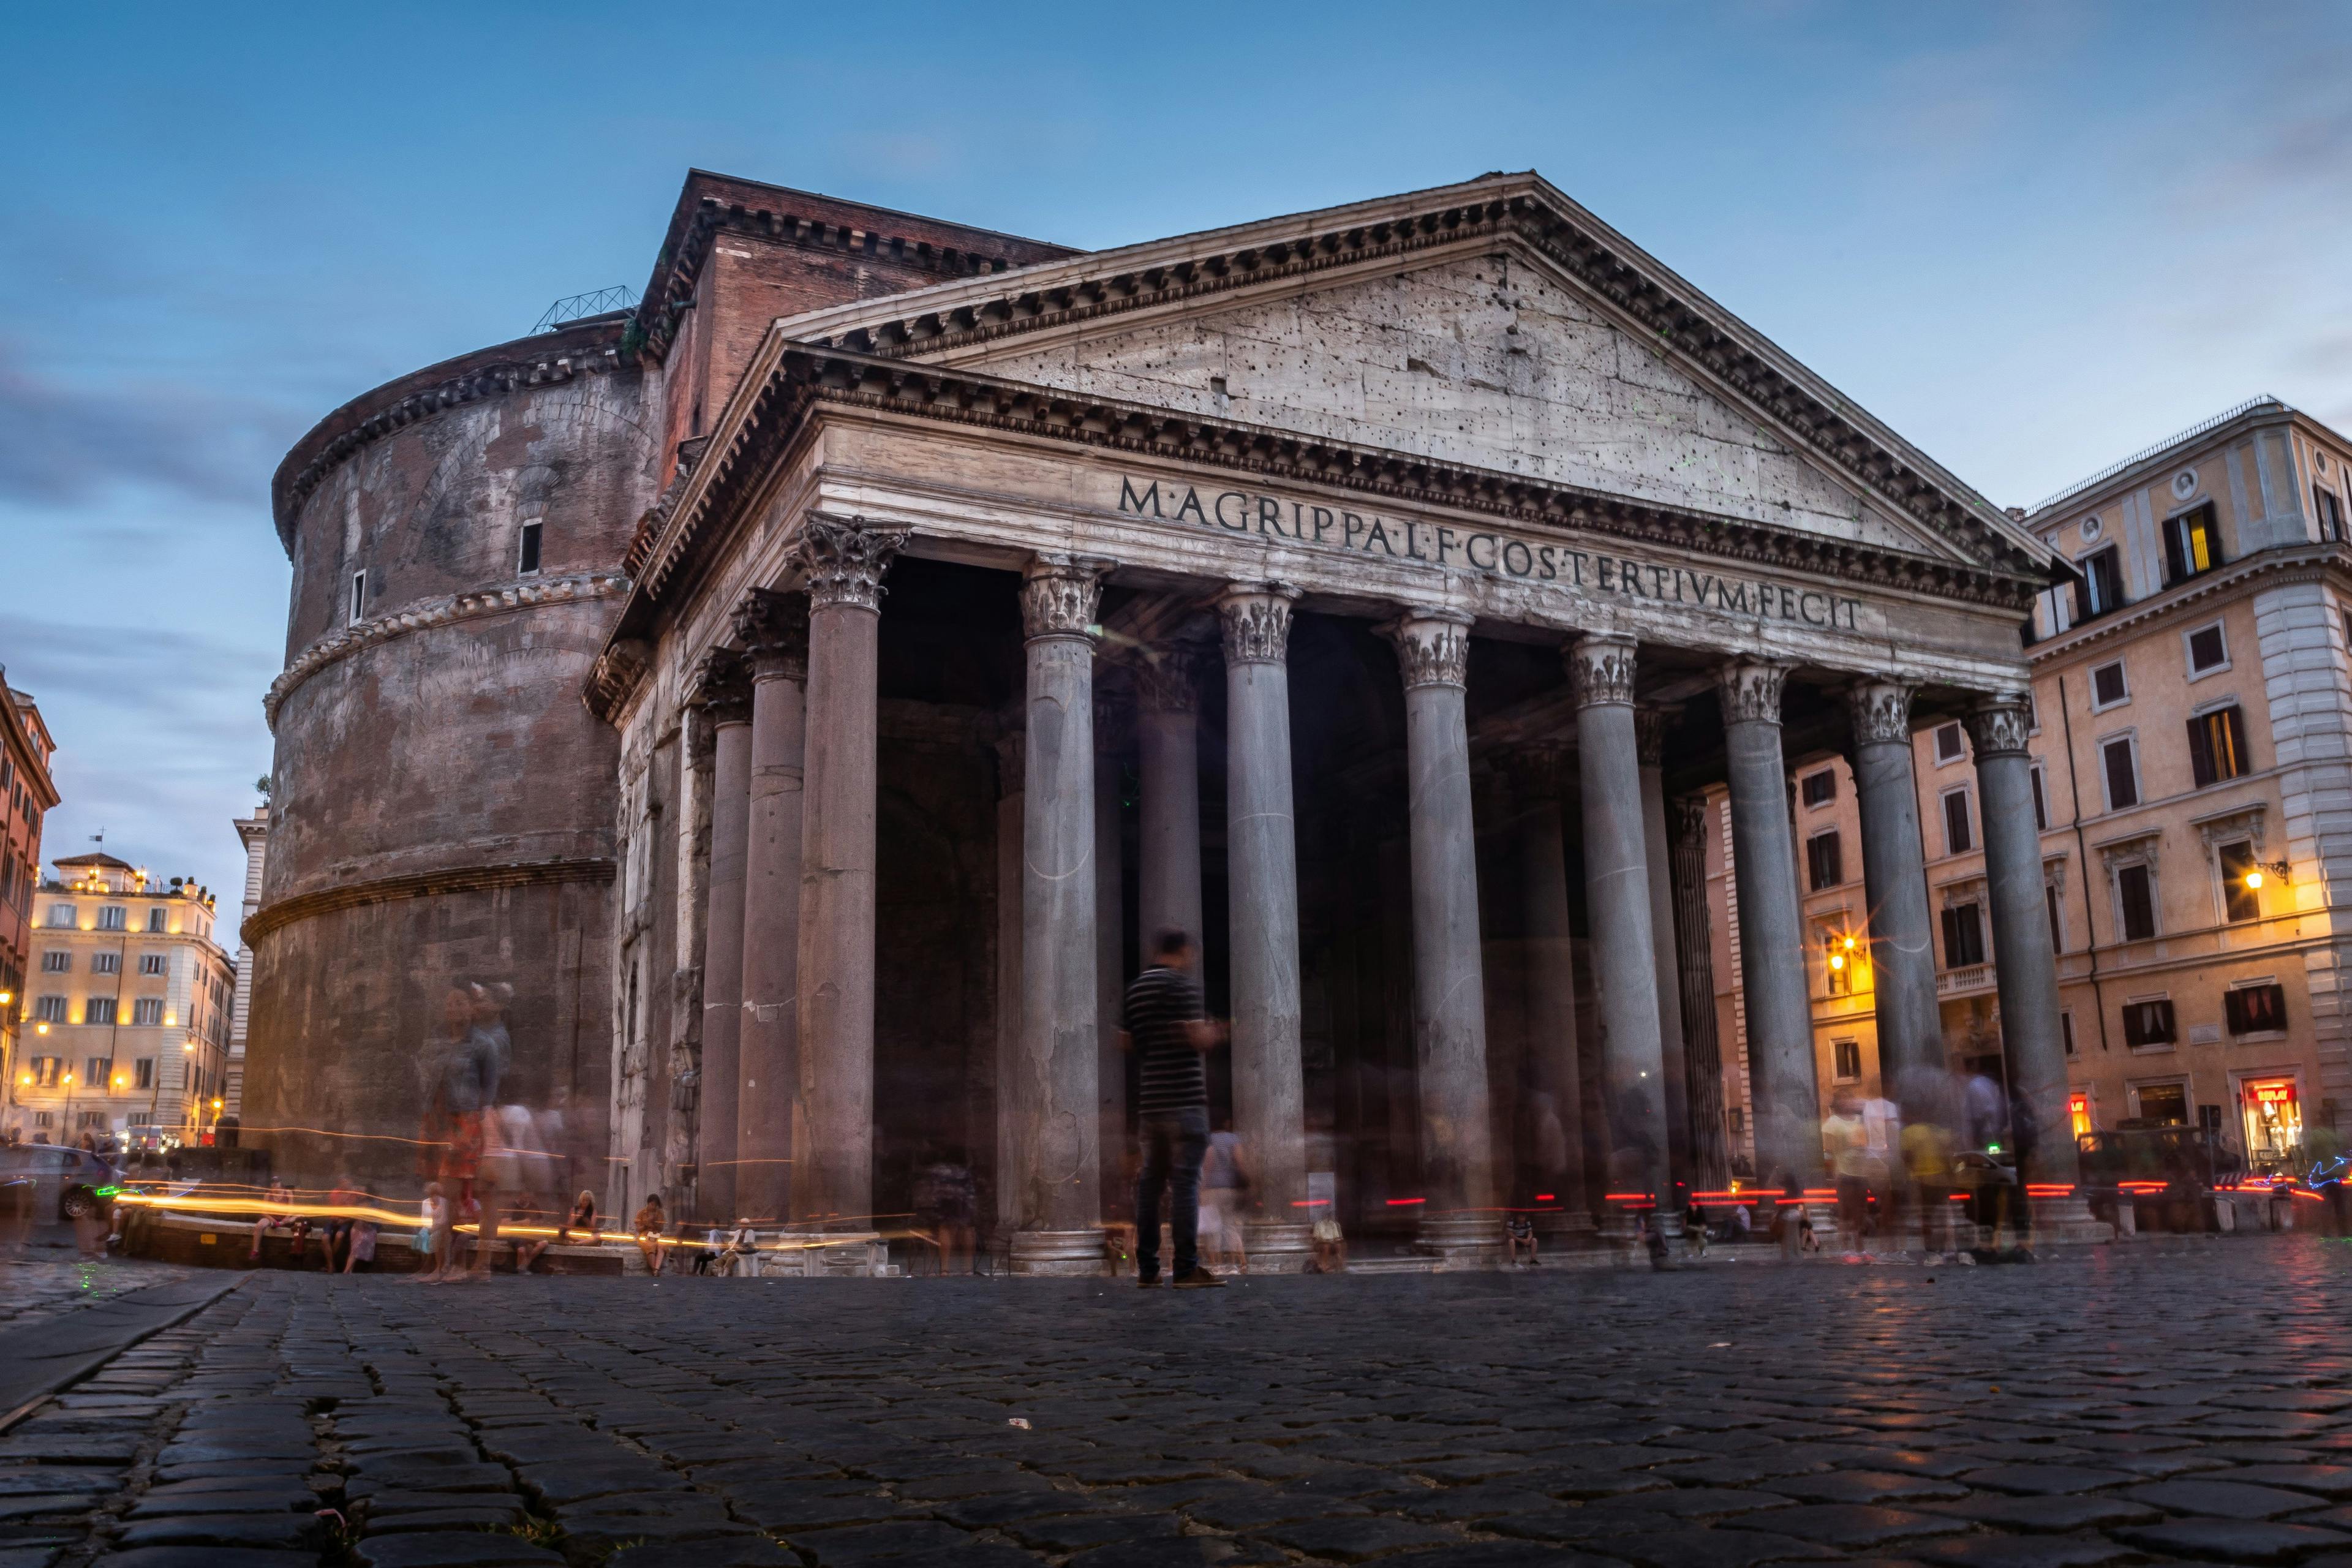 Pantheon in the center of Rome in Italy